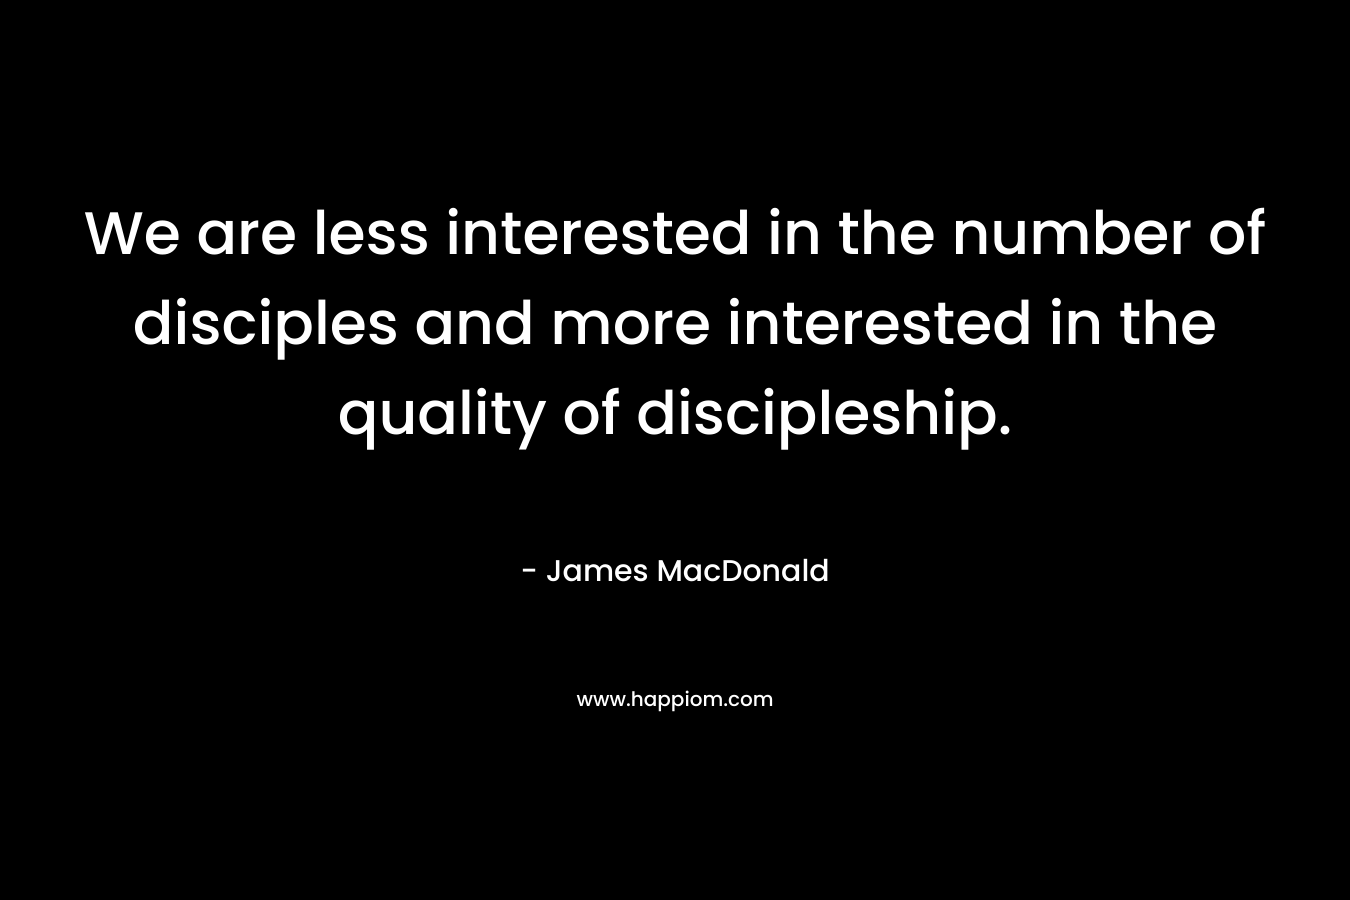 We are less interested in the number of disciples and more interested in the quality of discipleship.